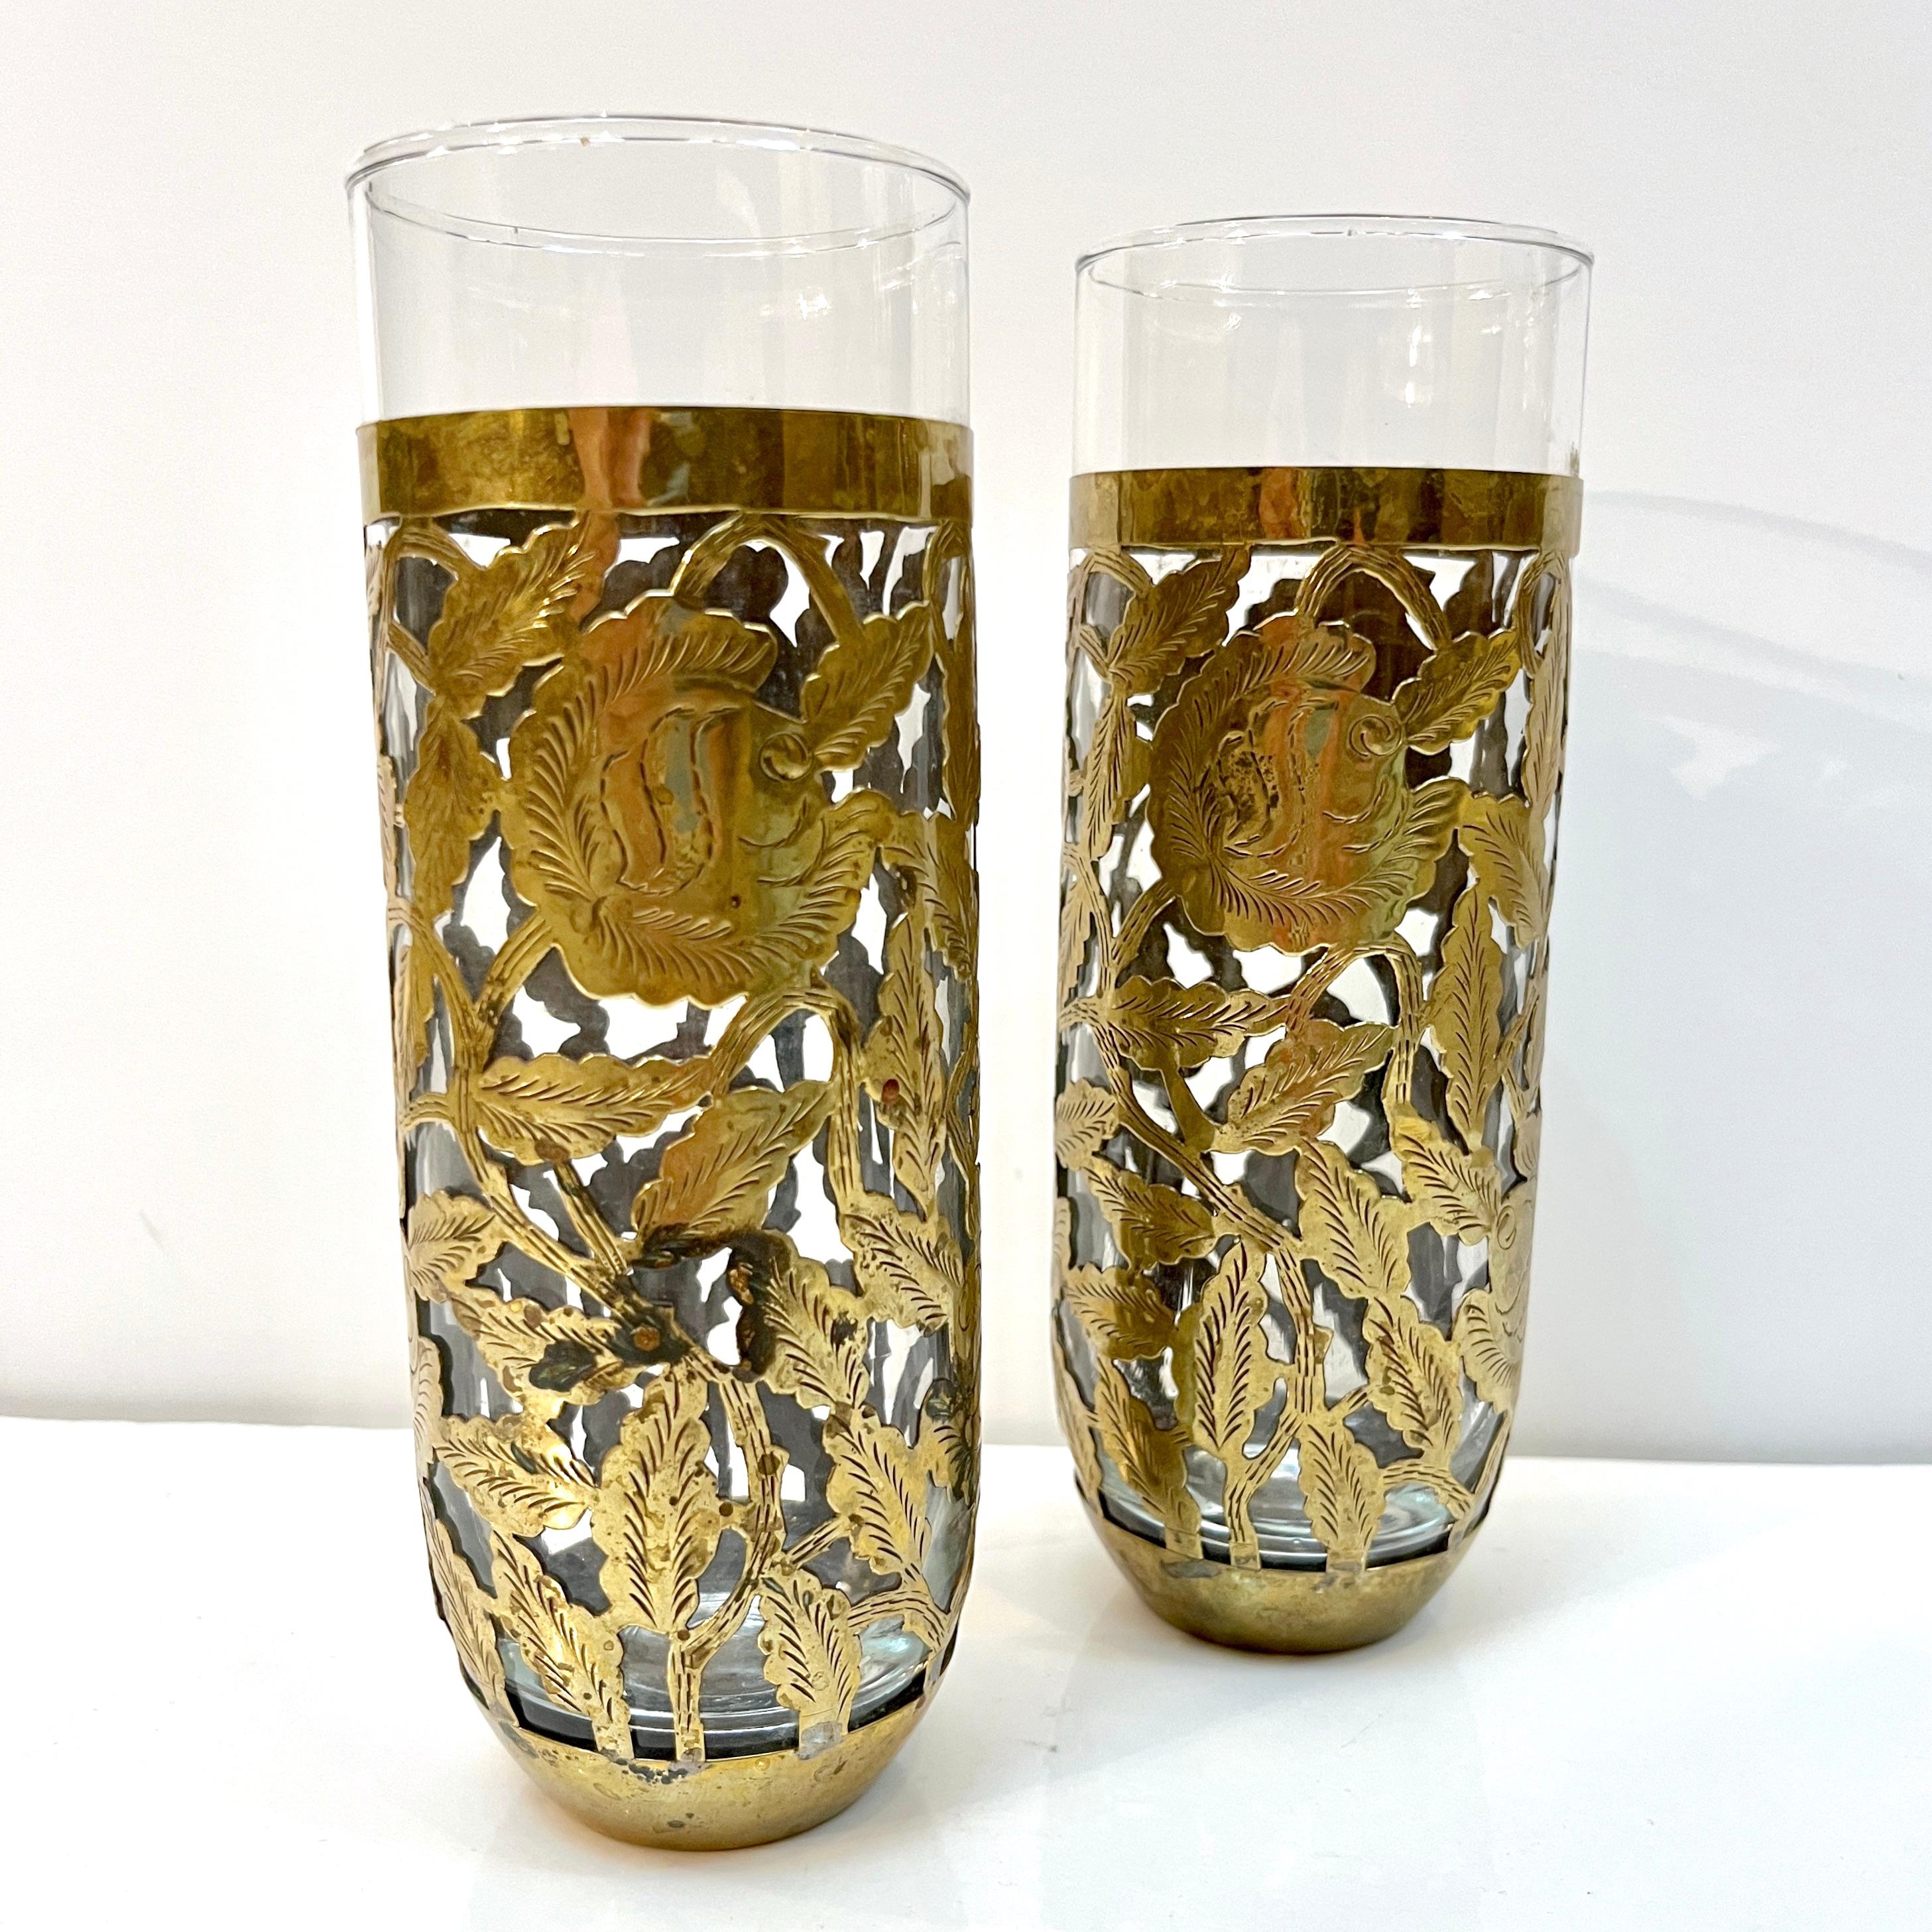 1960s mid-20th century pair of organic glasses, entirely handcrafted in Mexico, overlayed in a handmade antique brass open sheath ornate with an etched cutwork floral and foliage decor.
Ideal as barware but also as individual vases for floral